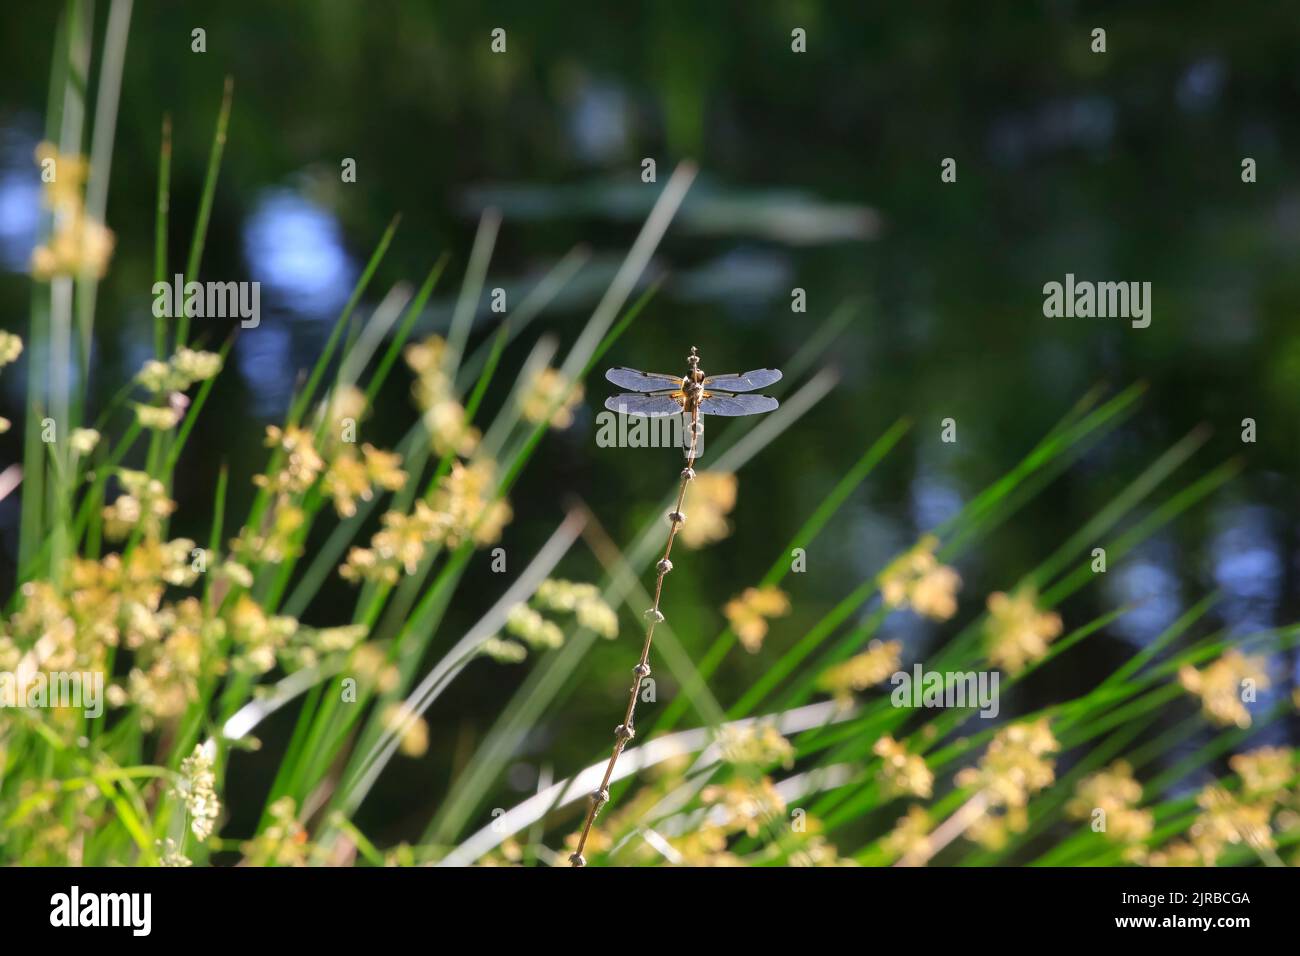 Dragonfly perching on plant stem Stock Photo